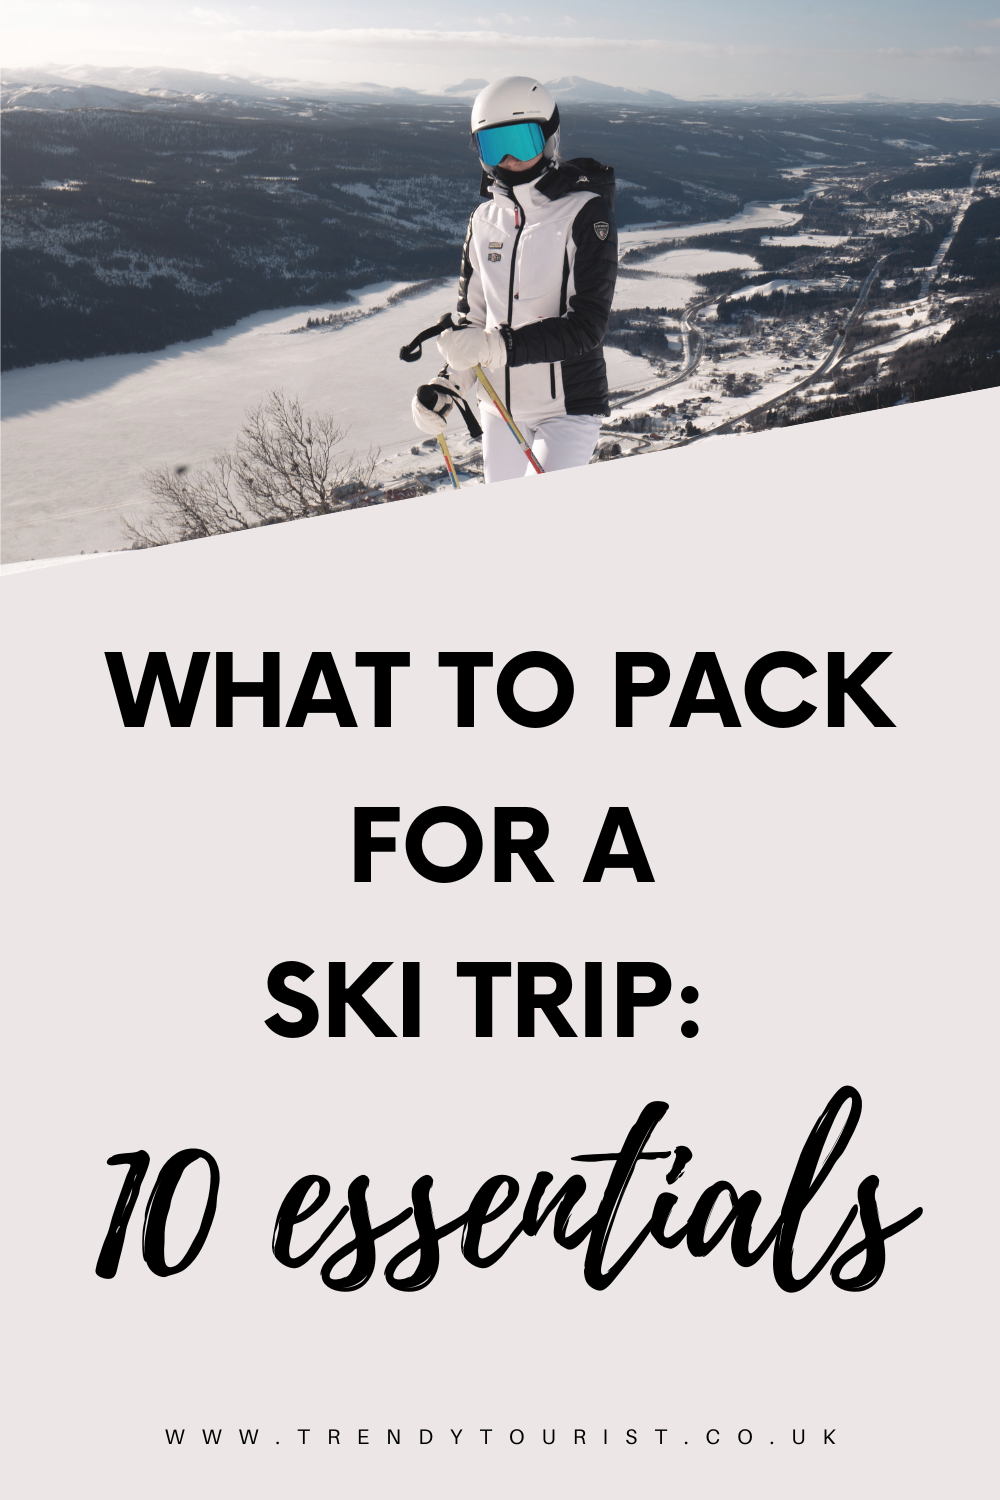 What to Pack for a Ski Trip: 10 Essentials